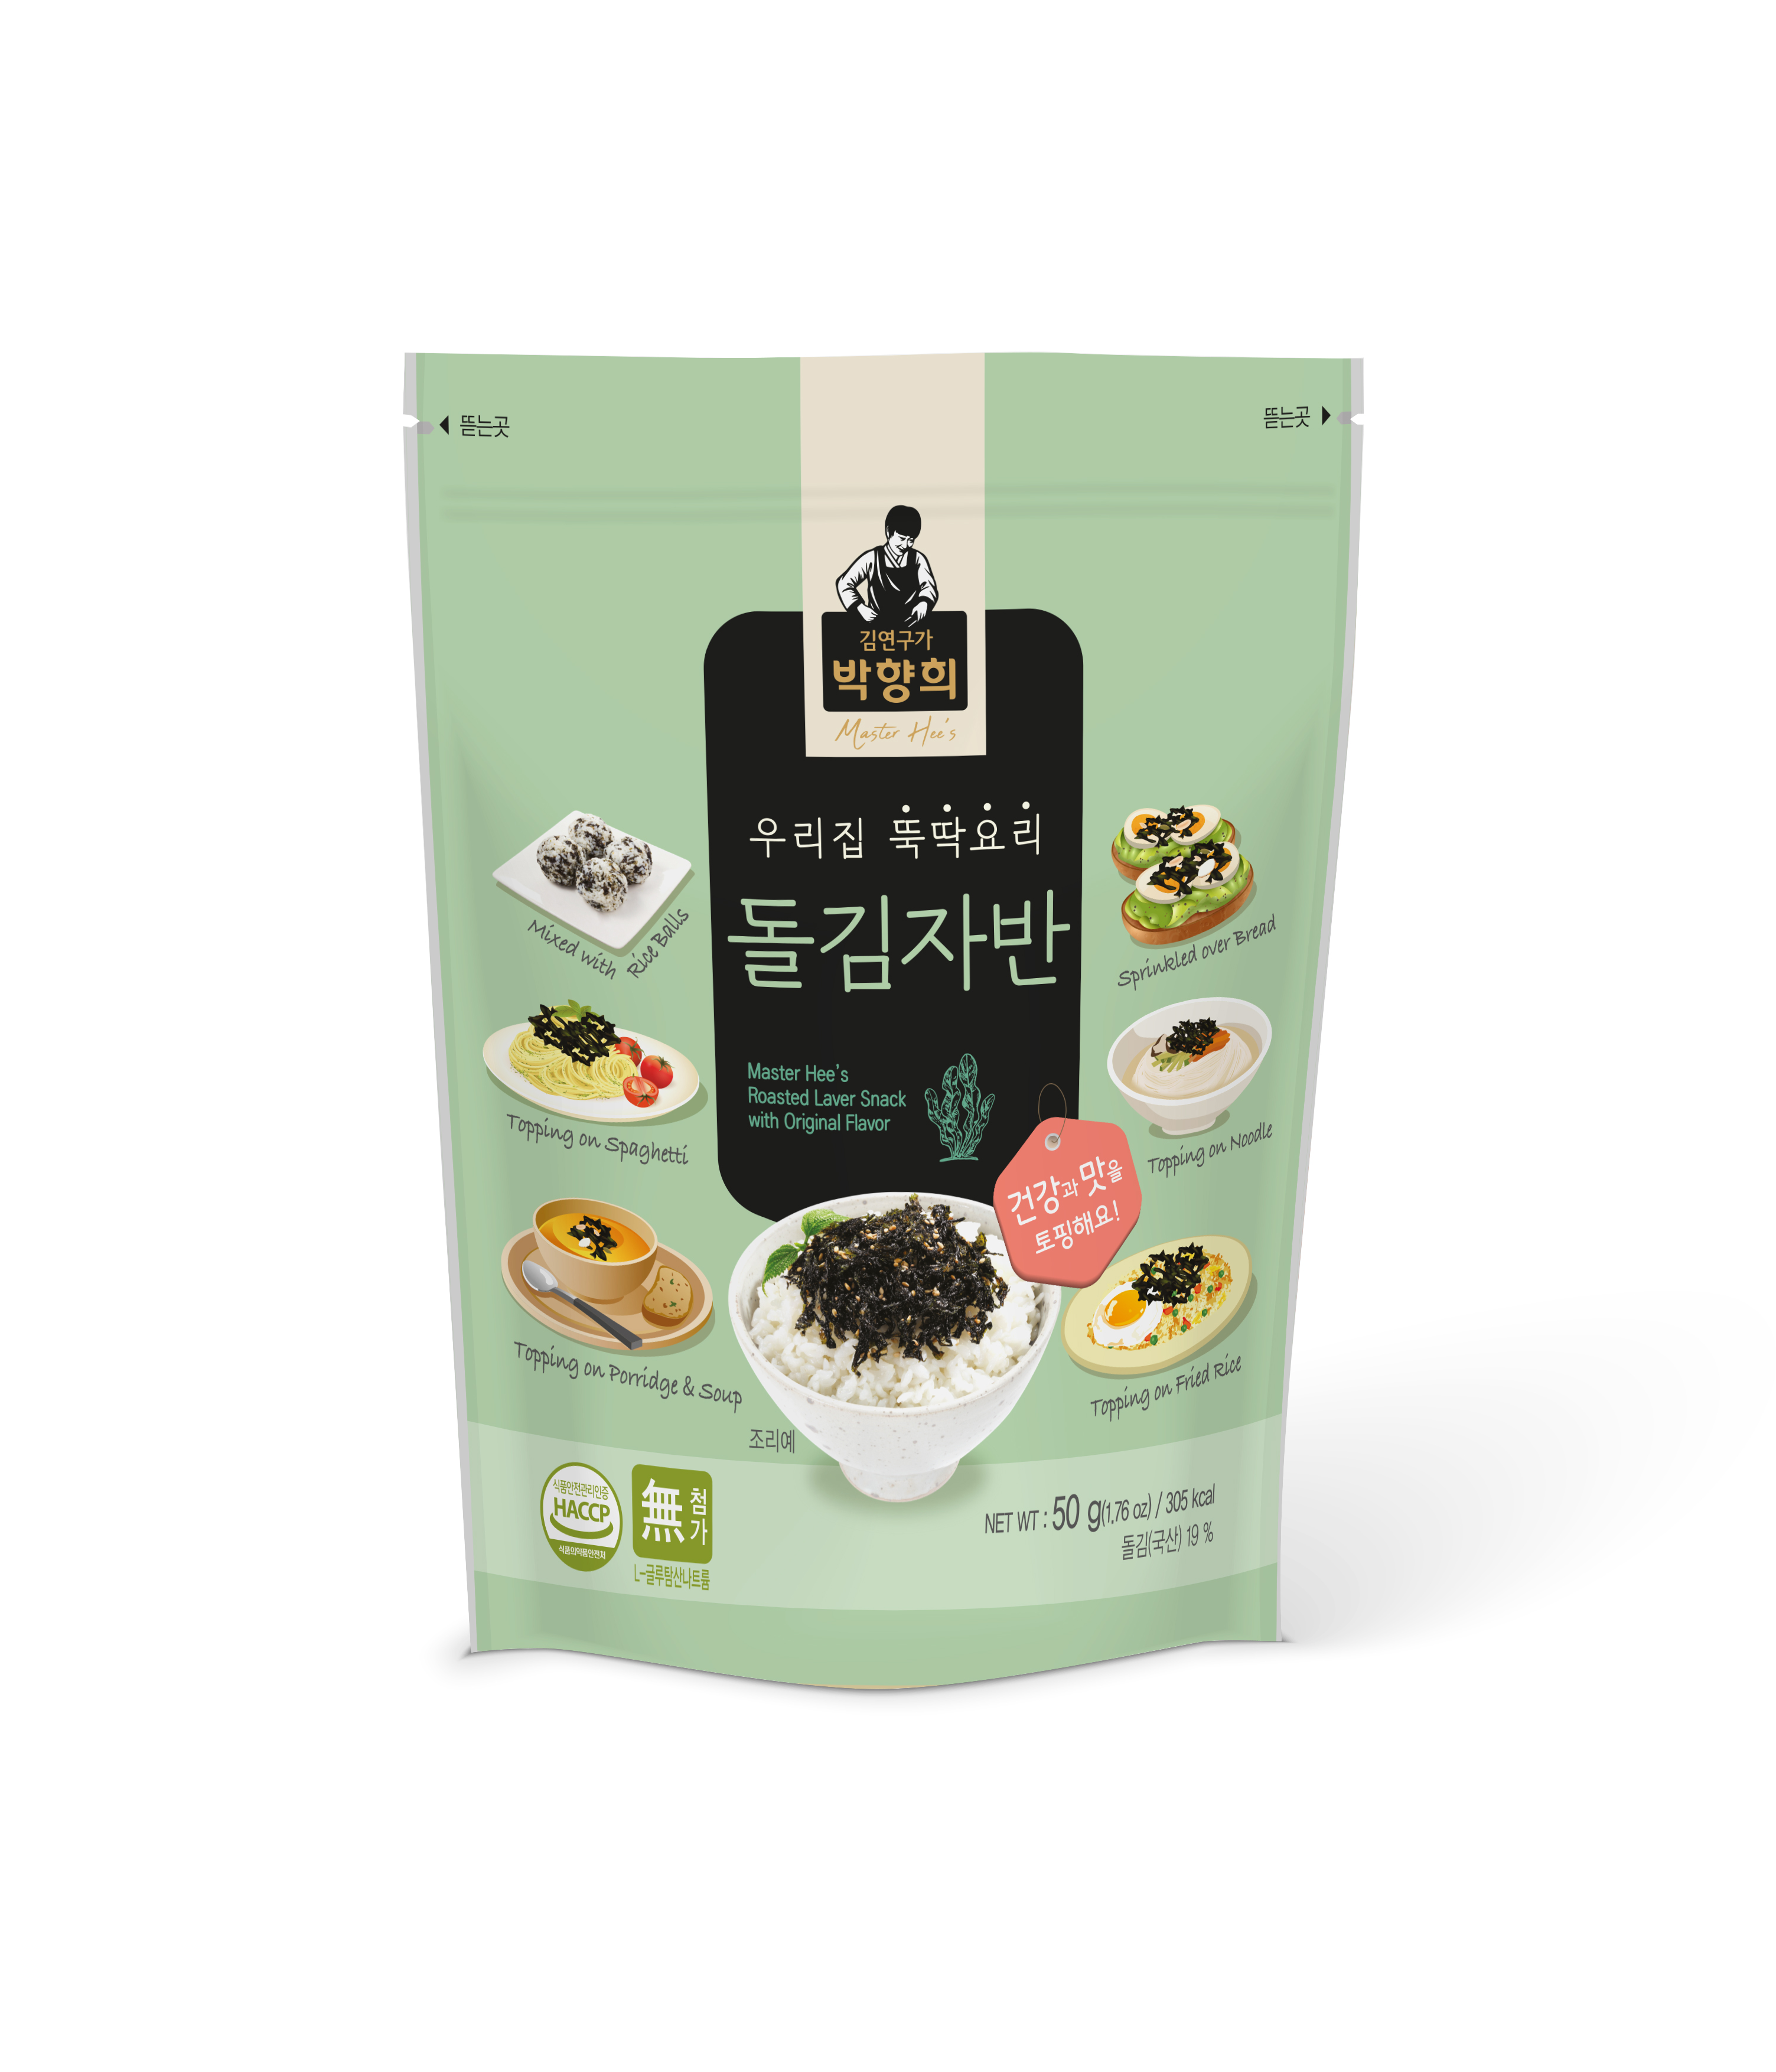 Master Hee' Roasted Laver Snack with Original Flavor 50g